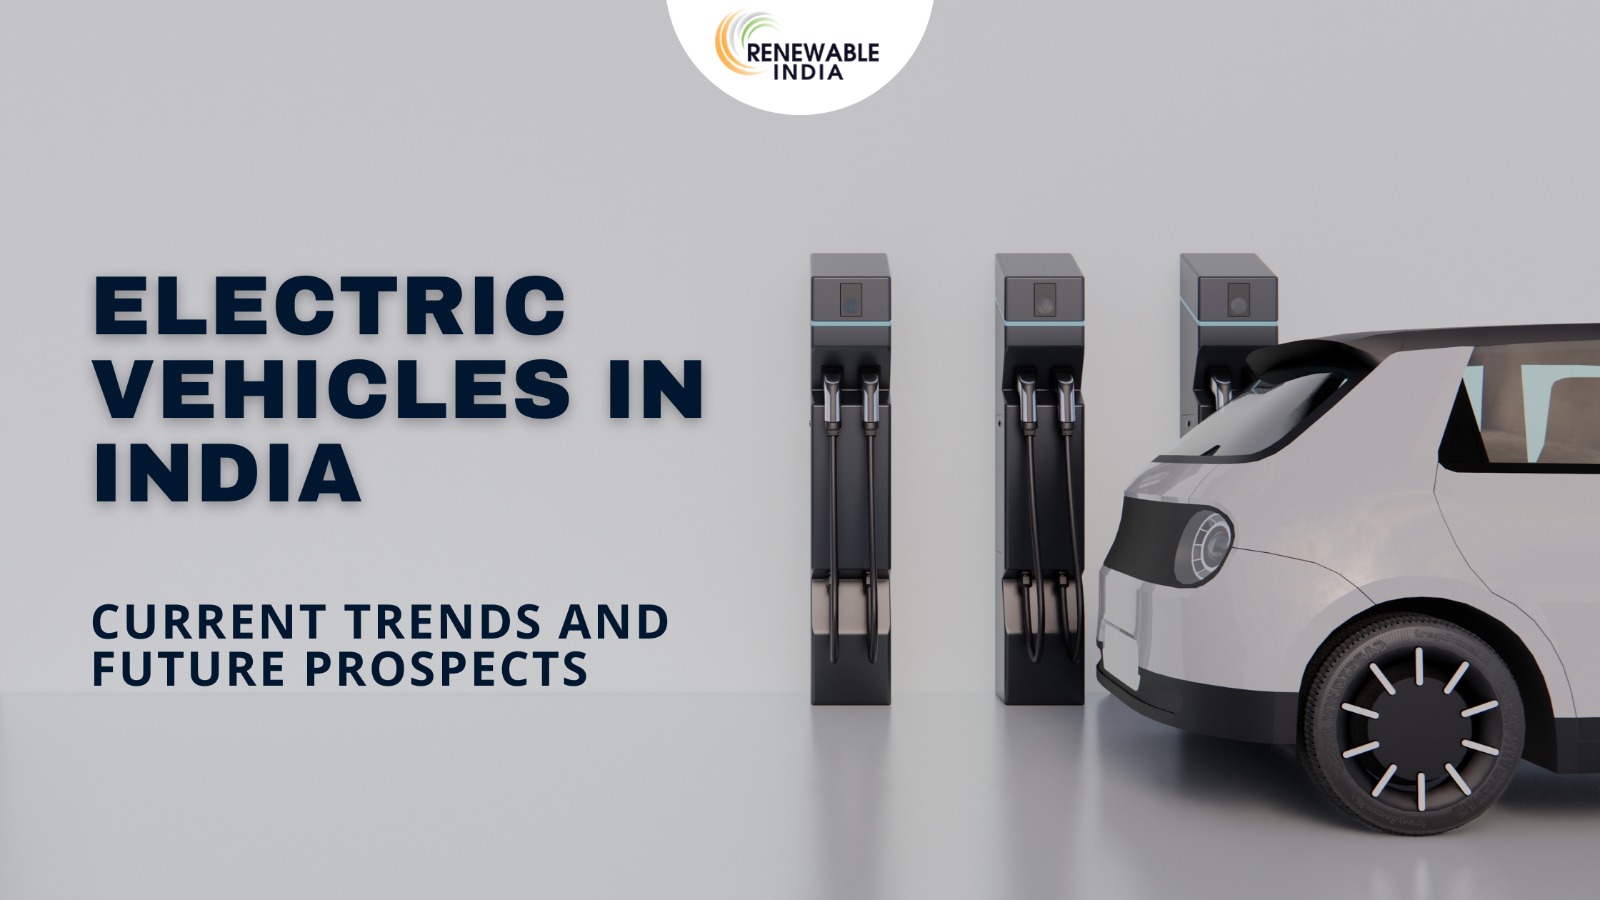 What is the EV market landscape in India?